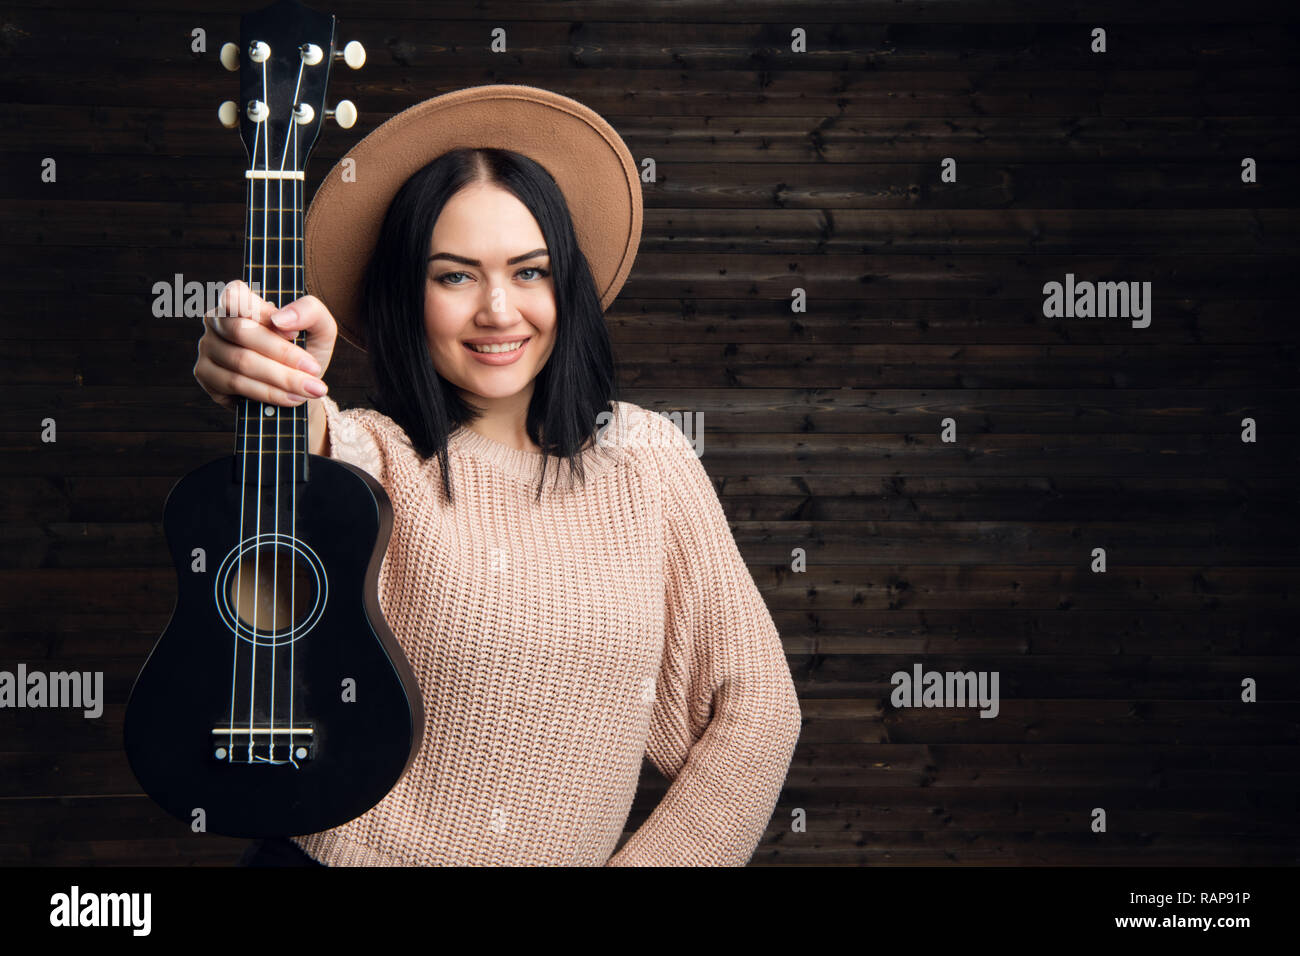 Young funny hipster girl having fun and playing on small ukulele guitar,  singing and dancing. wearing vintage hat, joy, positive mood. Dark wooden  wall background Stock Photo - Alamy